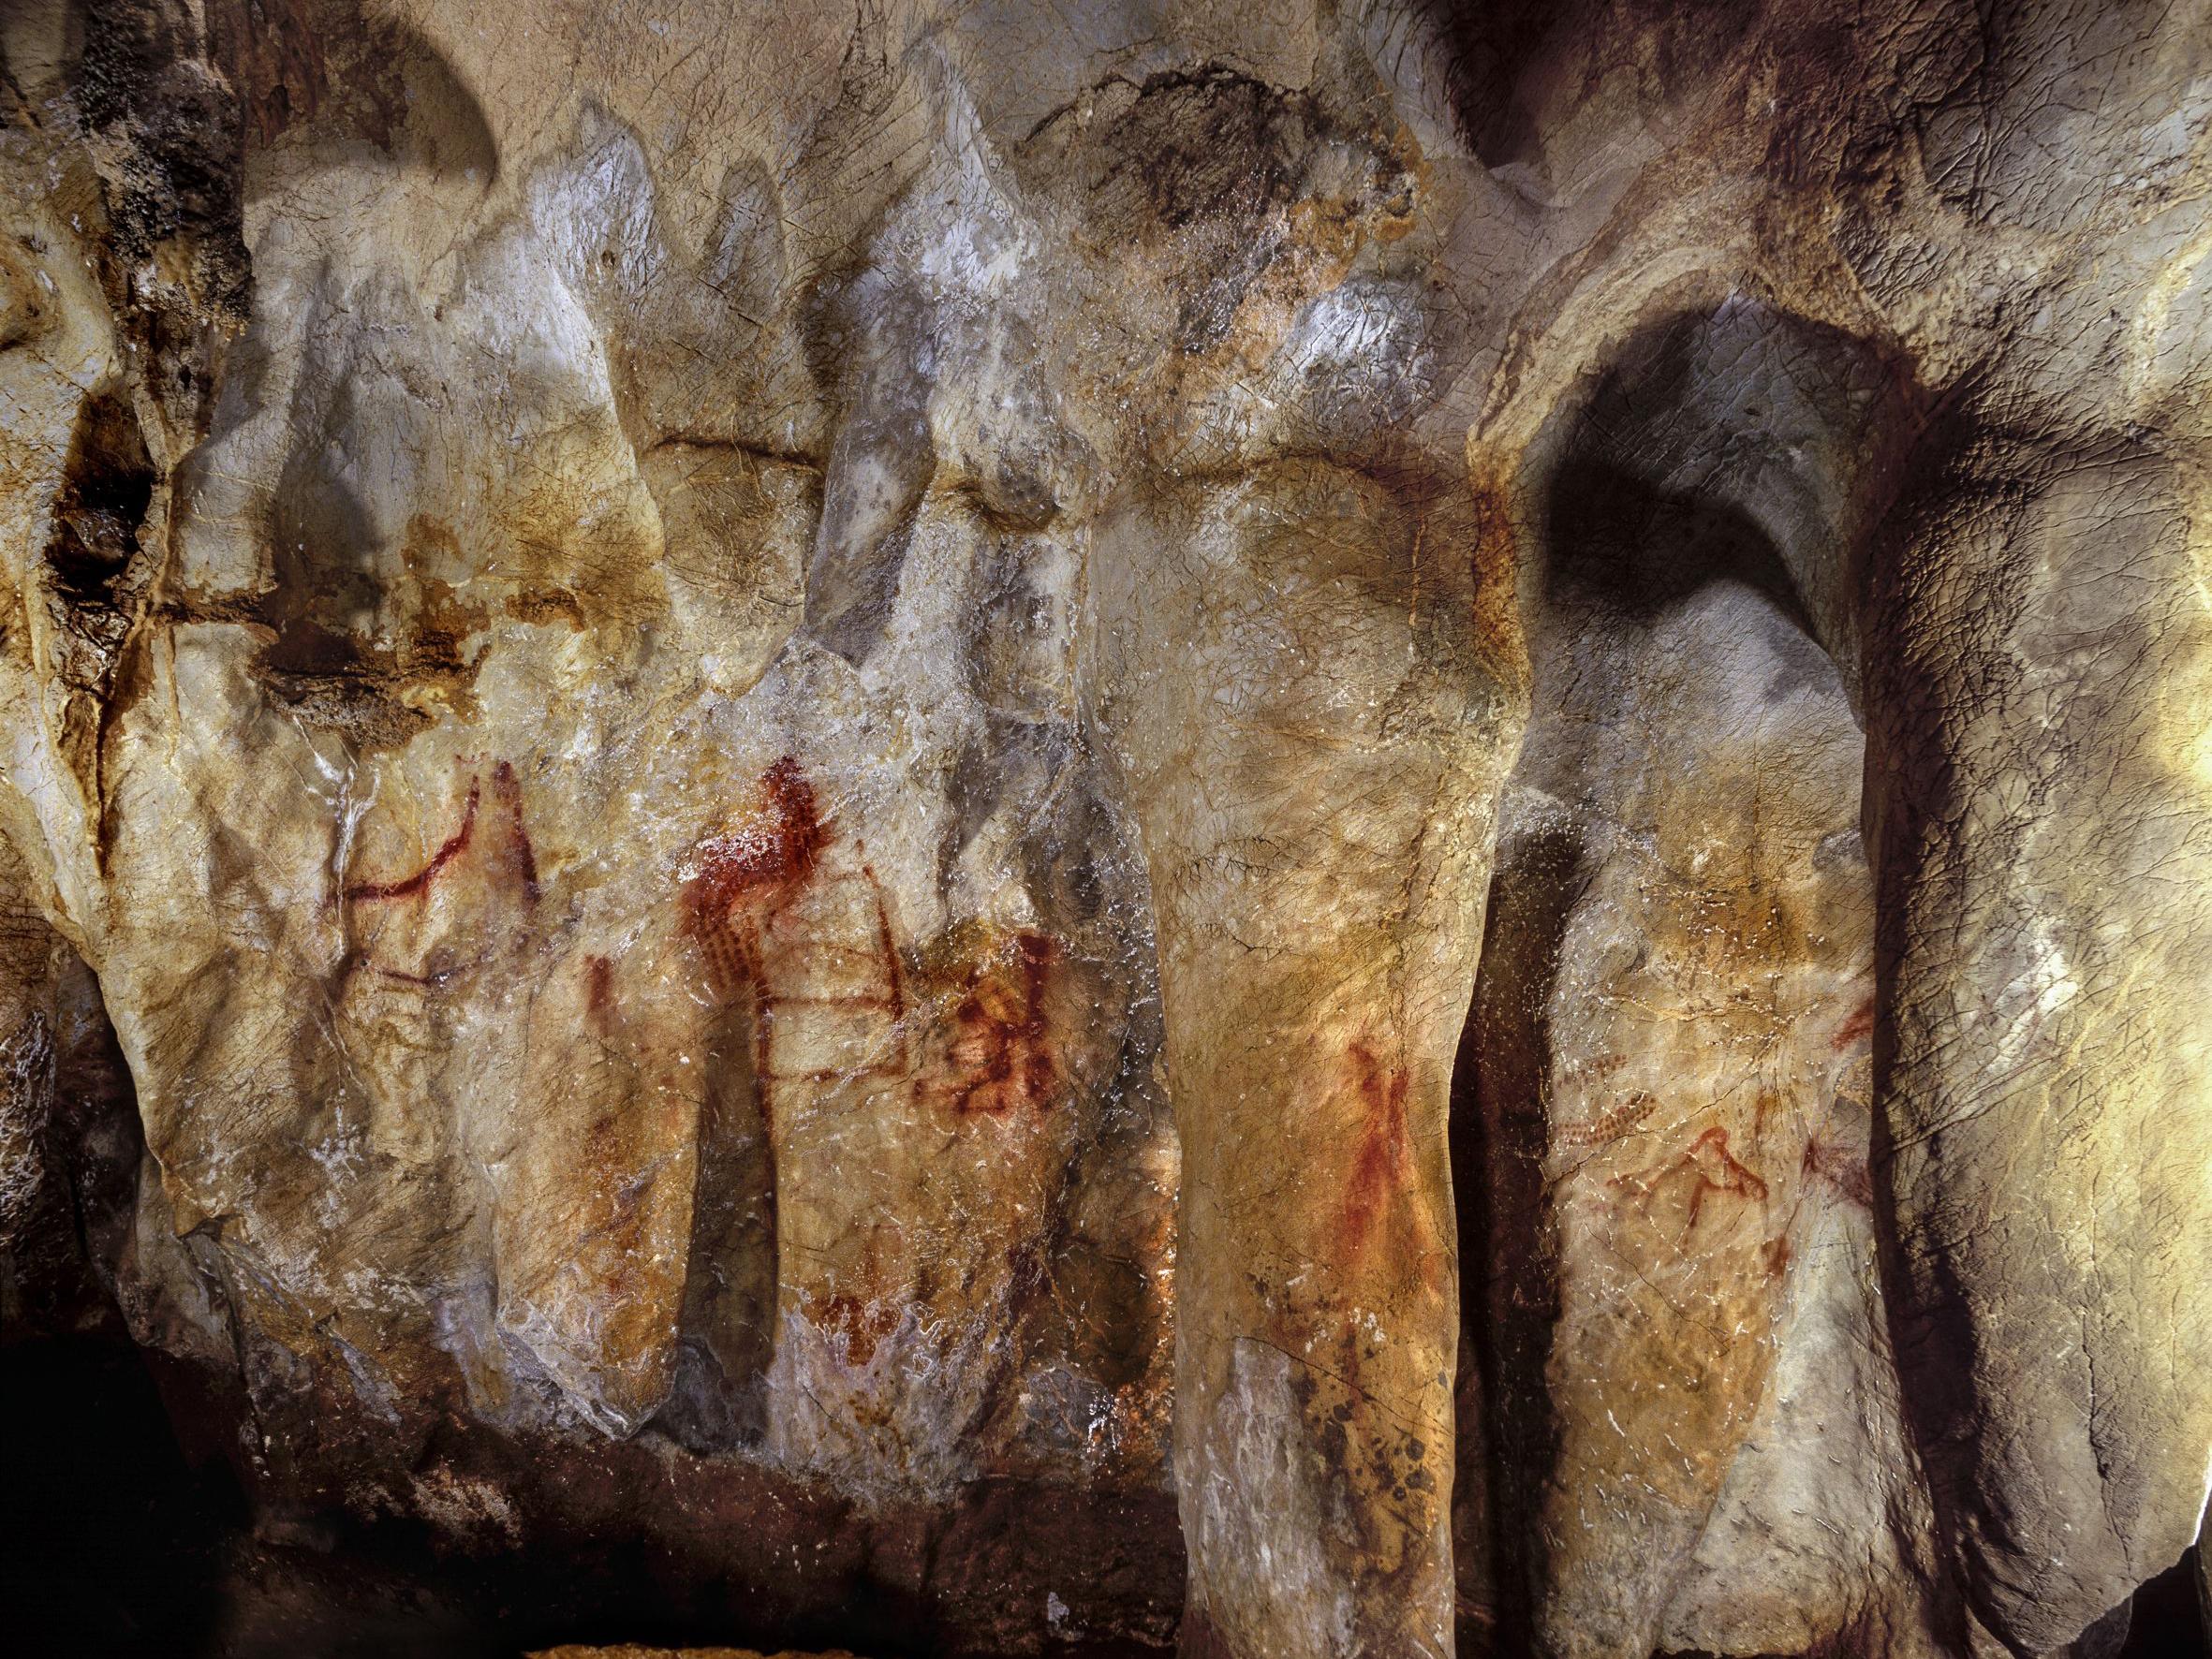 Paintings on the wall of La Pasiega cave, made over 64,000 years by Neanderthals (P Saura)